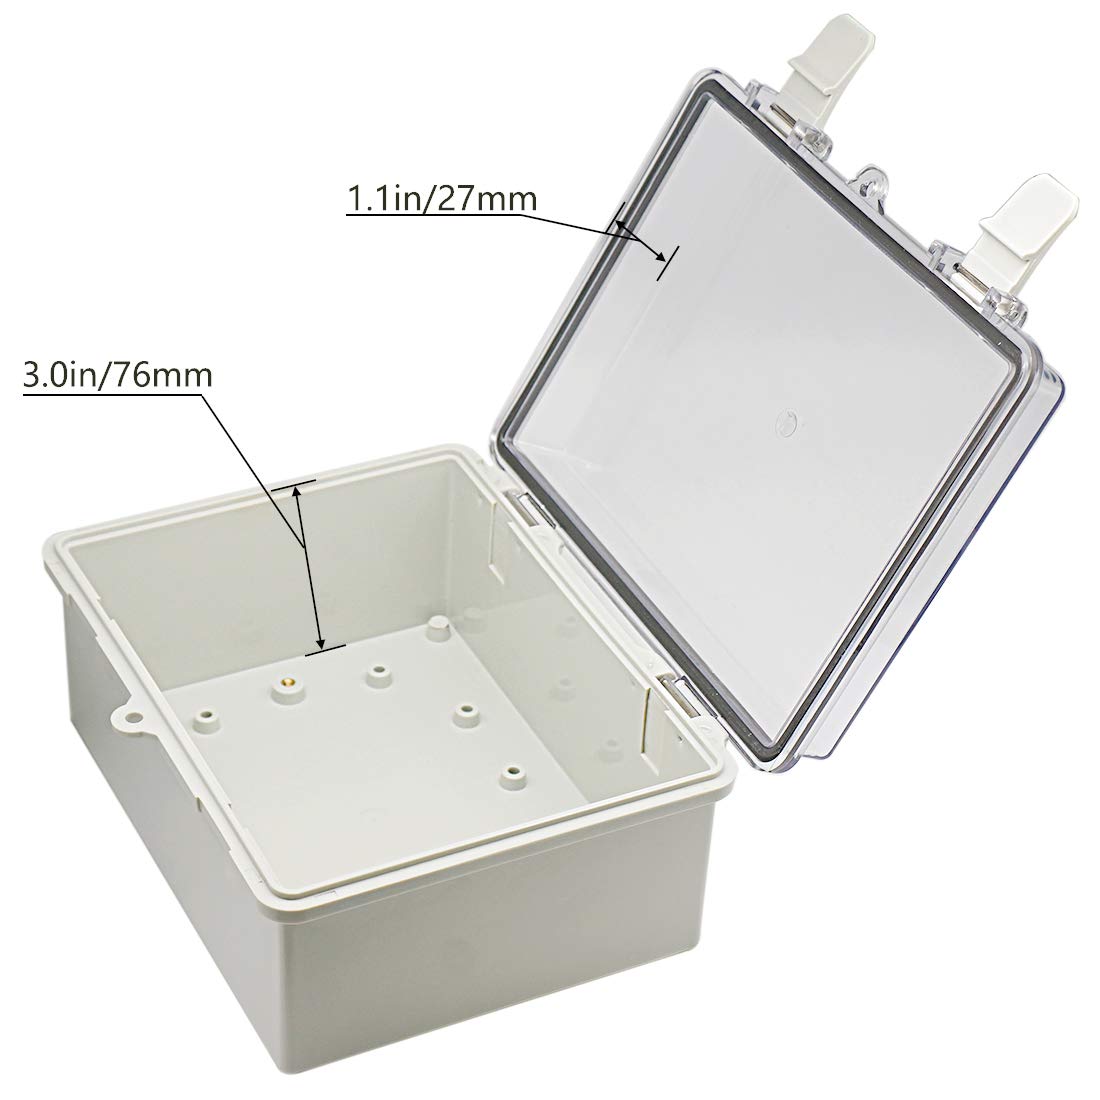 Zulkit Junction Box ABS Plastic Dustproof Waterproof IP65 Electrical Boxes Hinged Shell Outdoor Universal Project Enclosure Clea